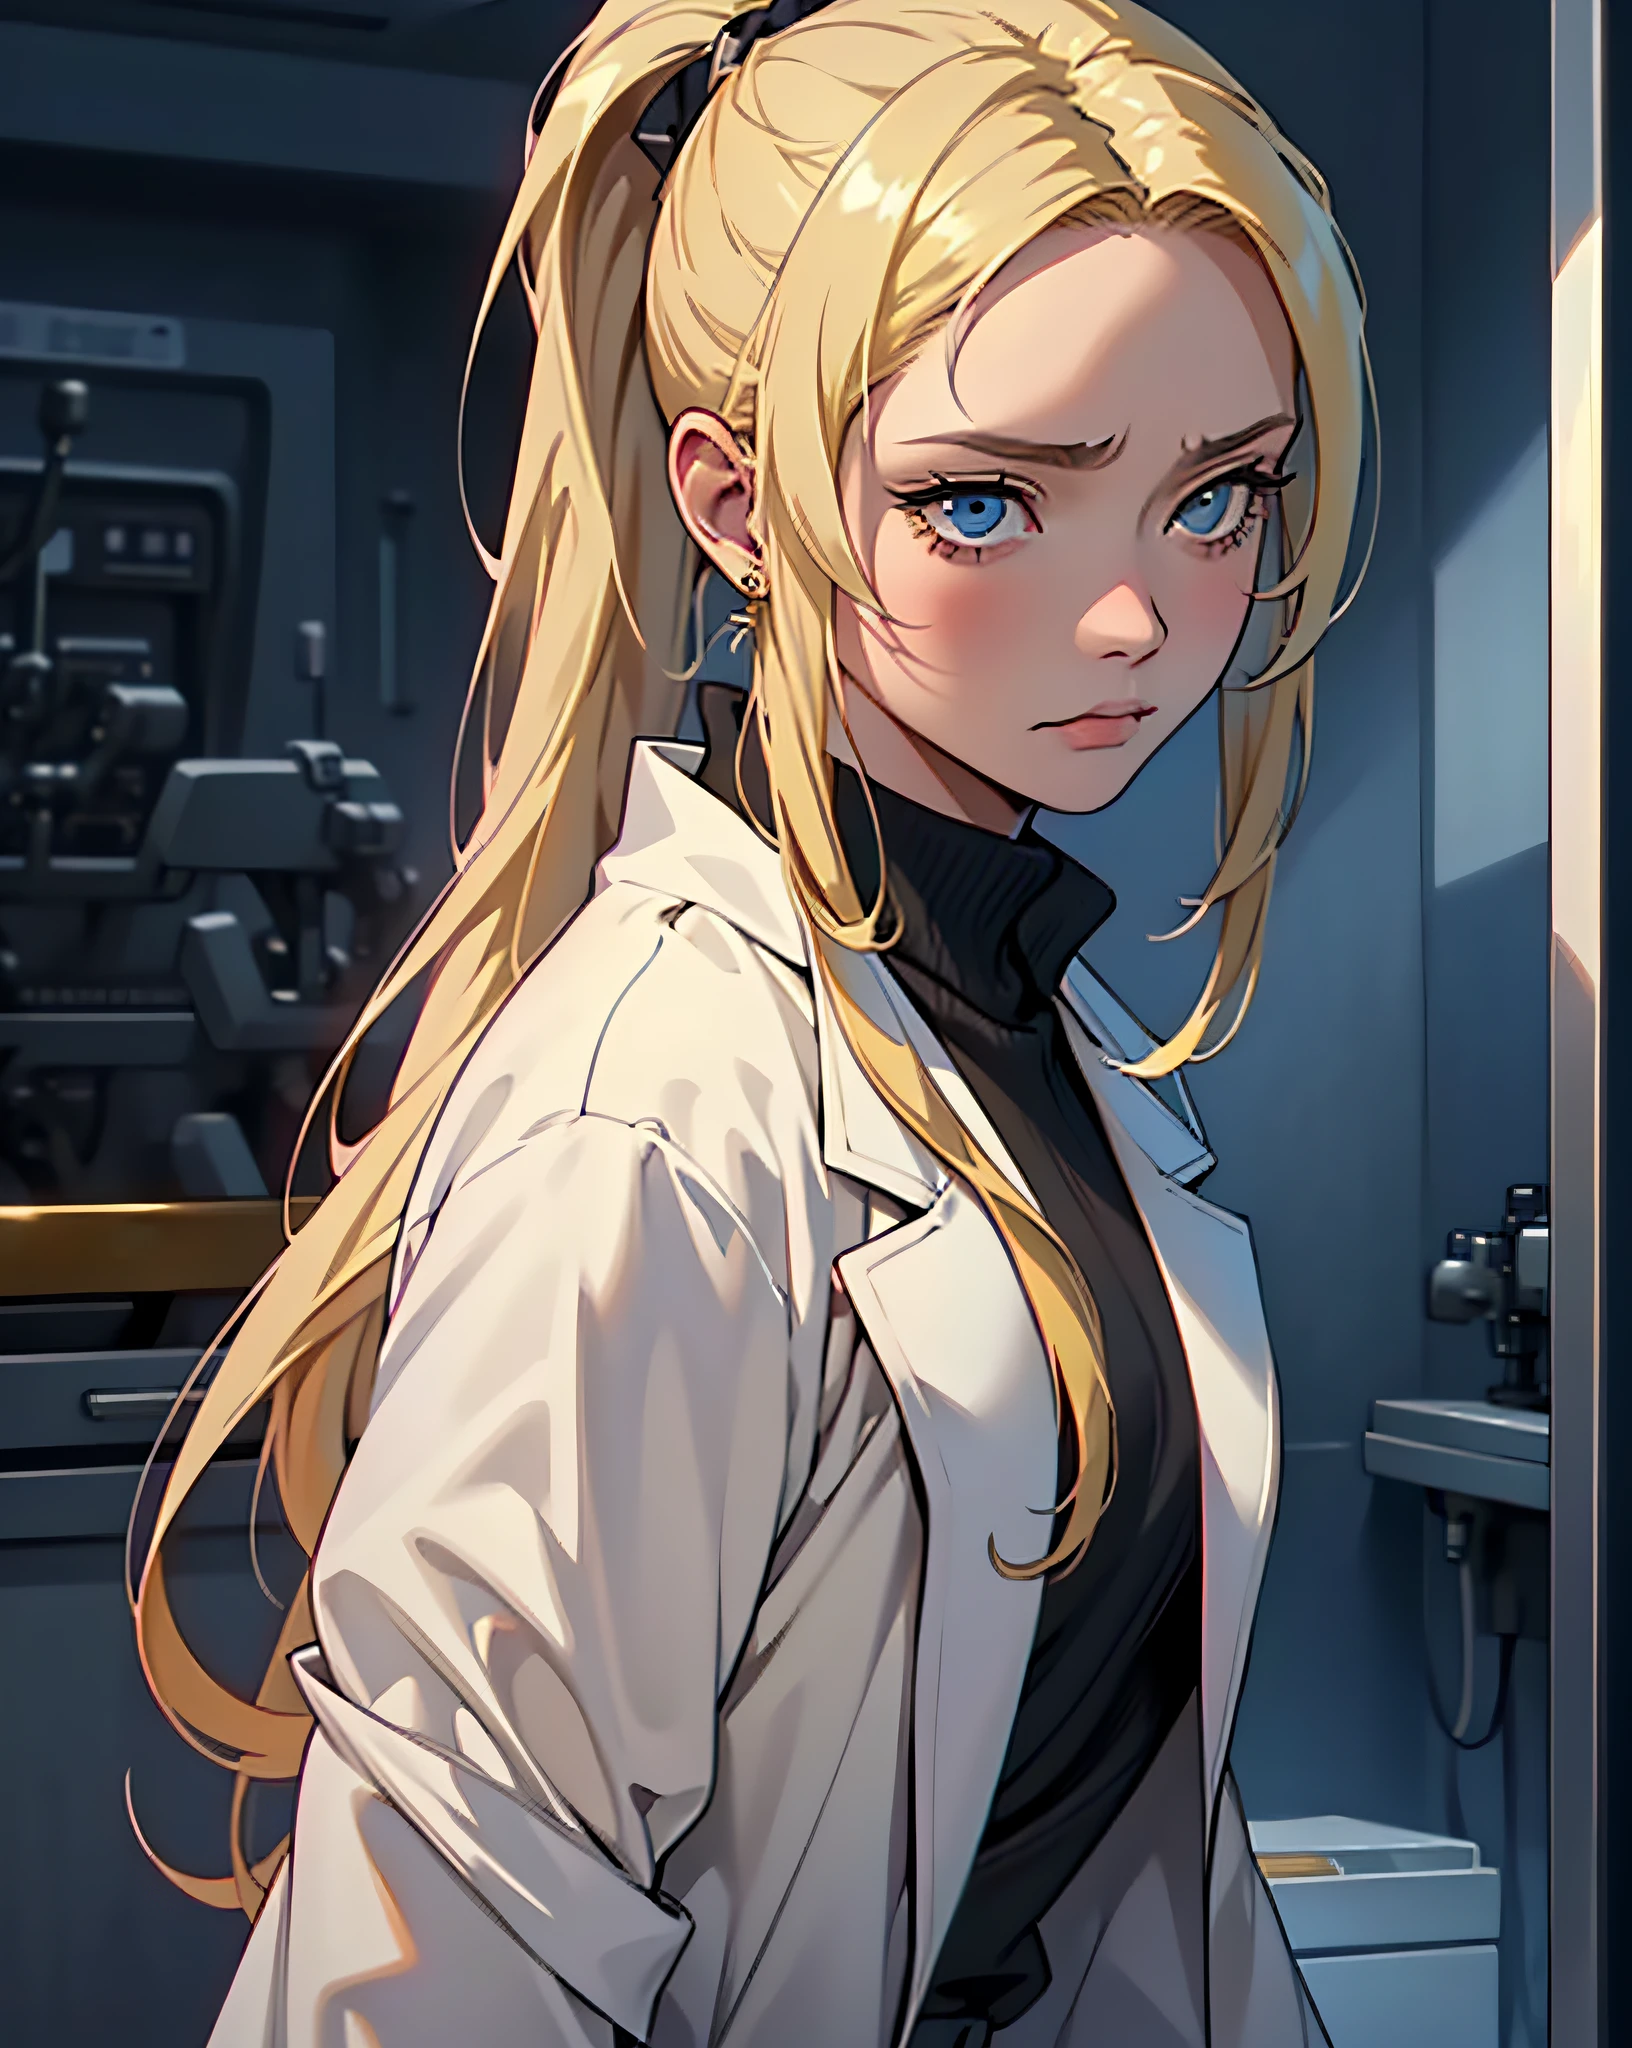 ((1girll))), malefocus, tmasterpiece, high high quality, (tmasterpiece:1.2), (best qualityer:1.2), shiny skin, realisticlying, opulent, complex, ((blond hairbl)), (High ponytail), White coat, The expression is sad, ellegance_clothes, hospitals, Melancholy Look , (The upper part of the body), (sexly)